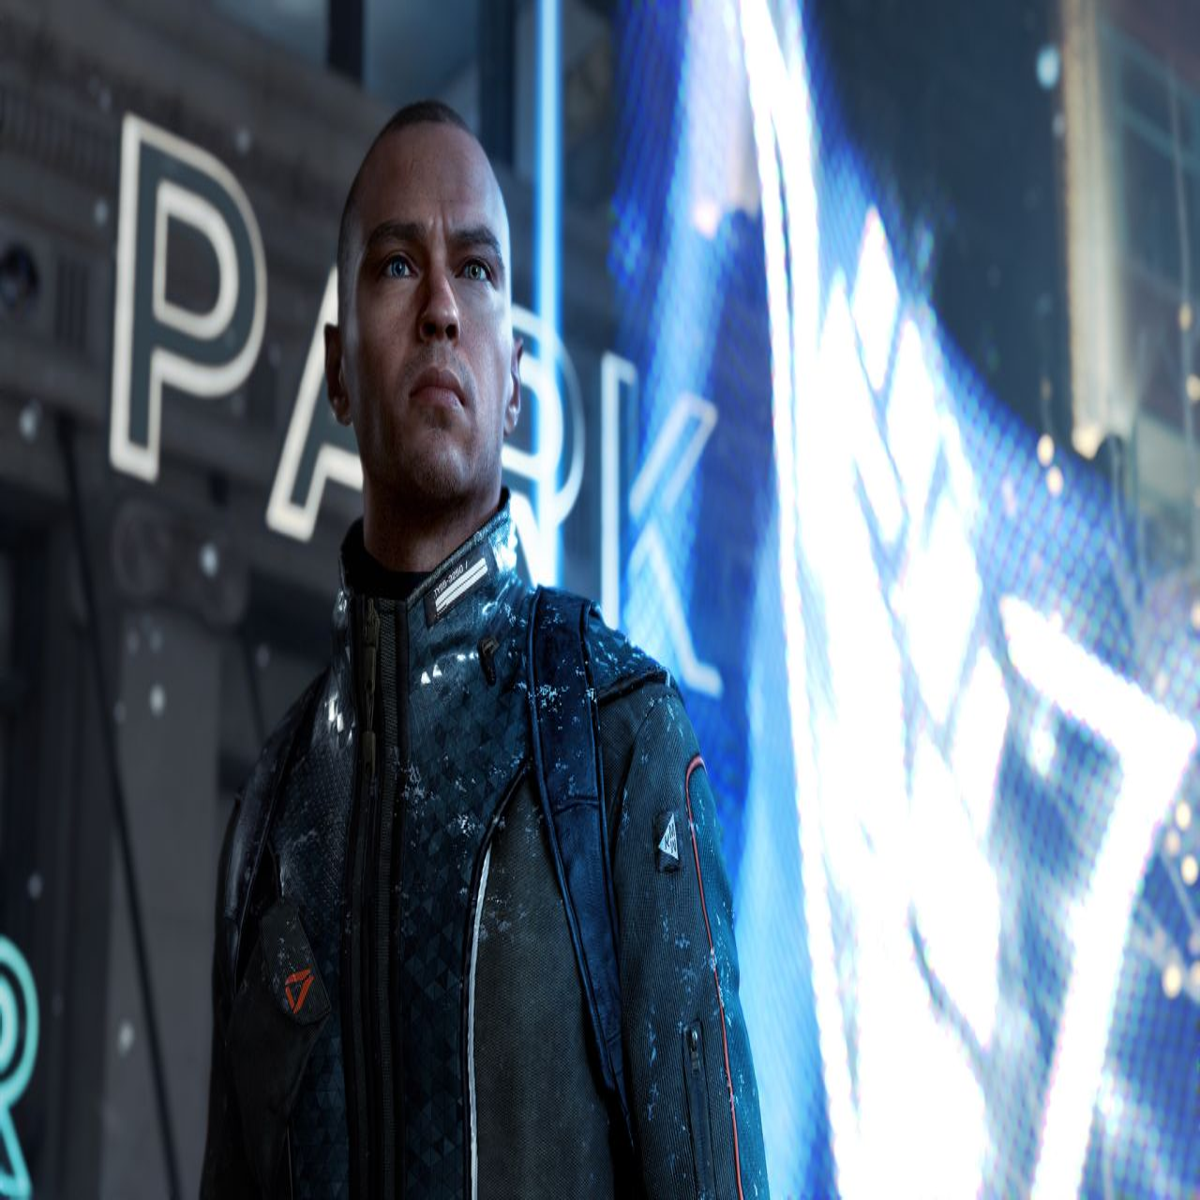 Detroit: Become Human Debuts Three New Character Trailers